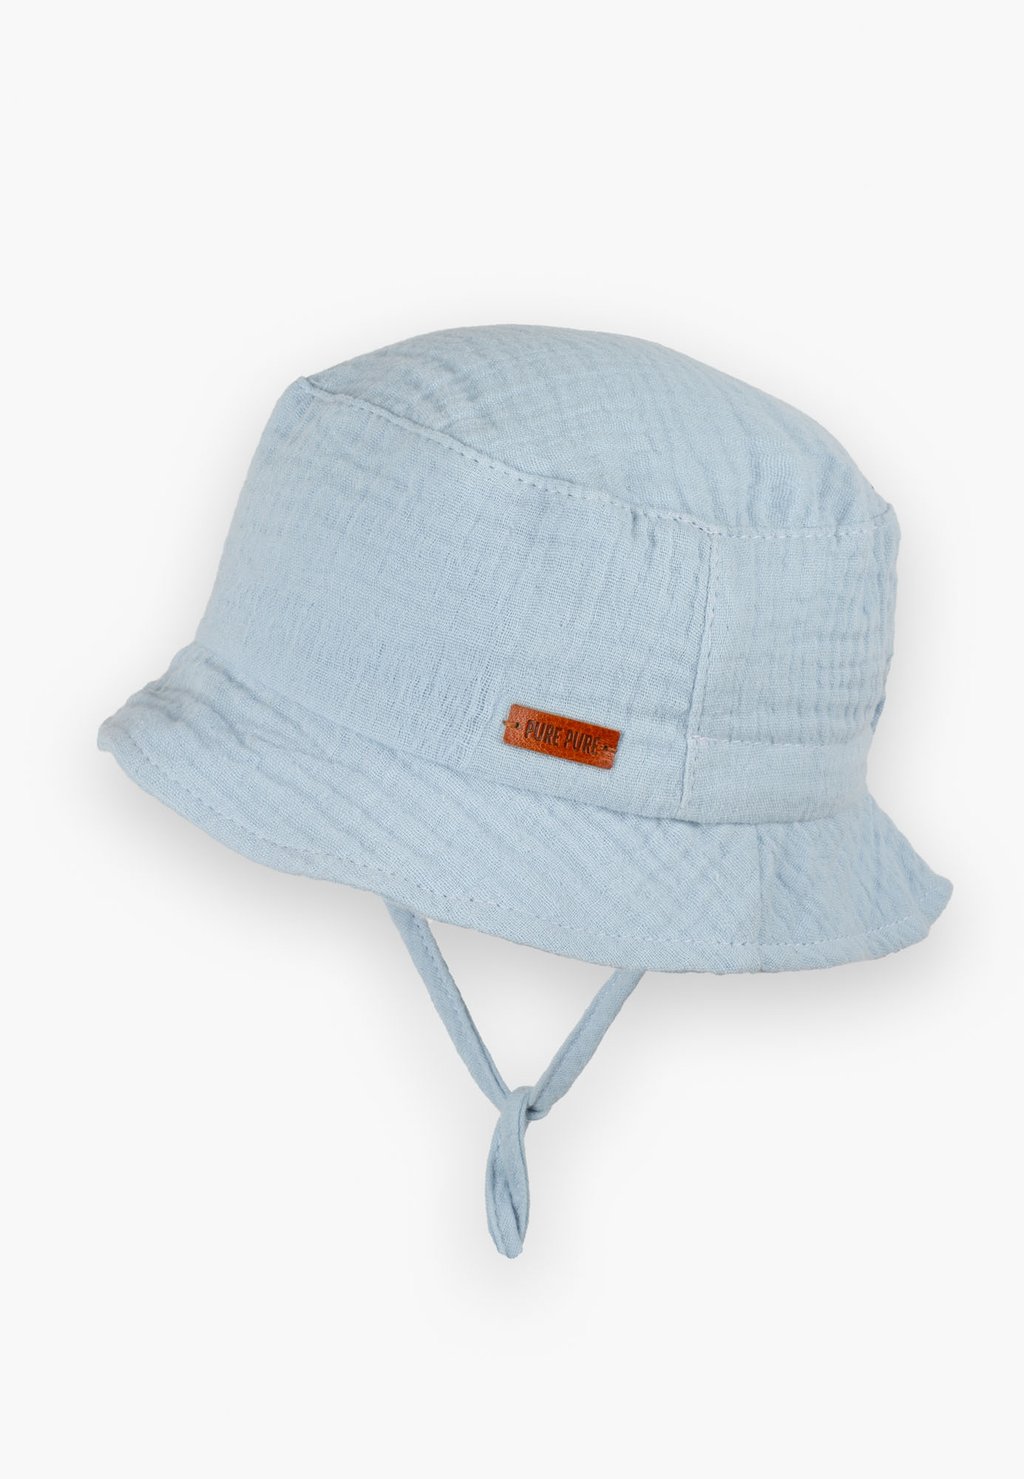 Панама TODDLER BUCKET HAT UNISEX pure pure by BAUER, цвет light blue